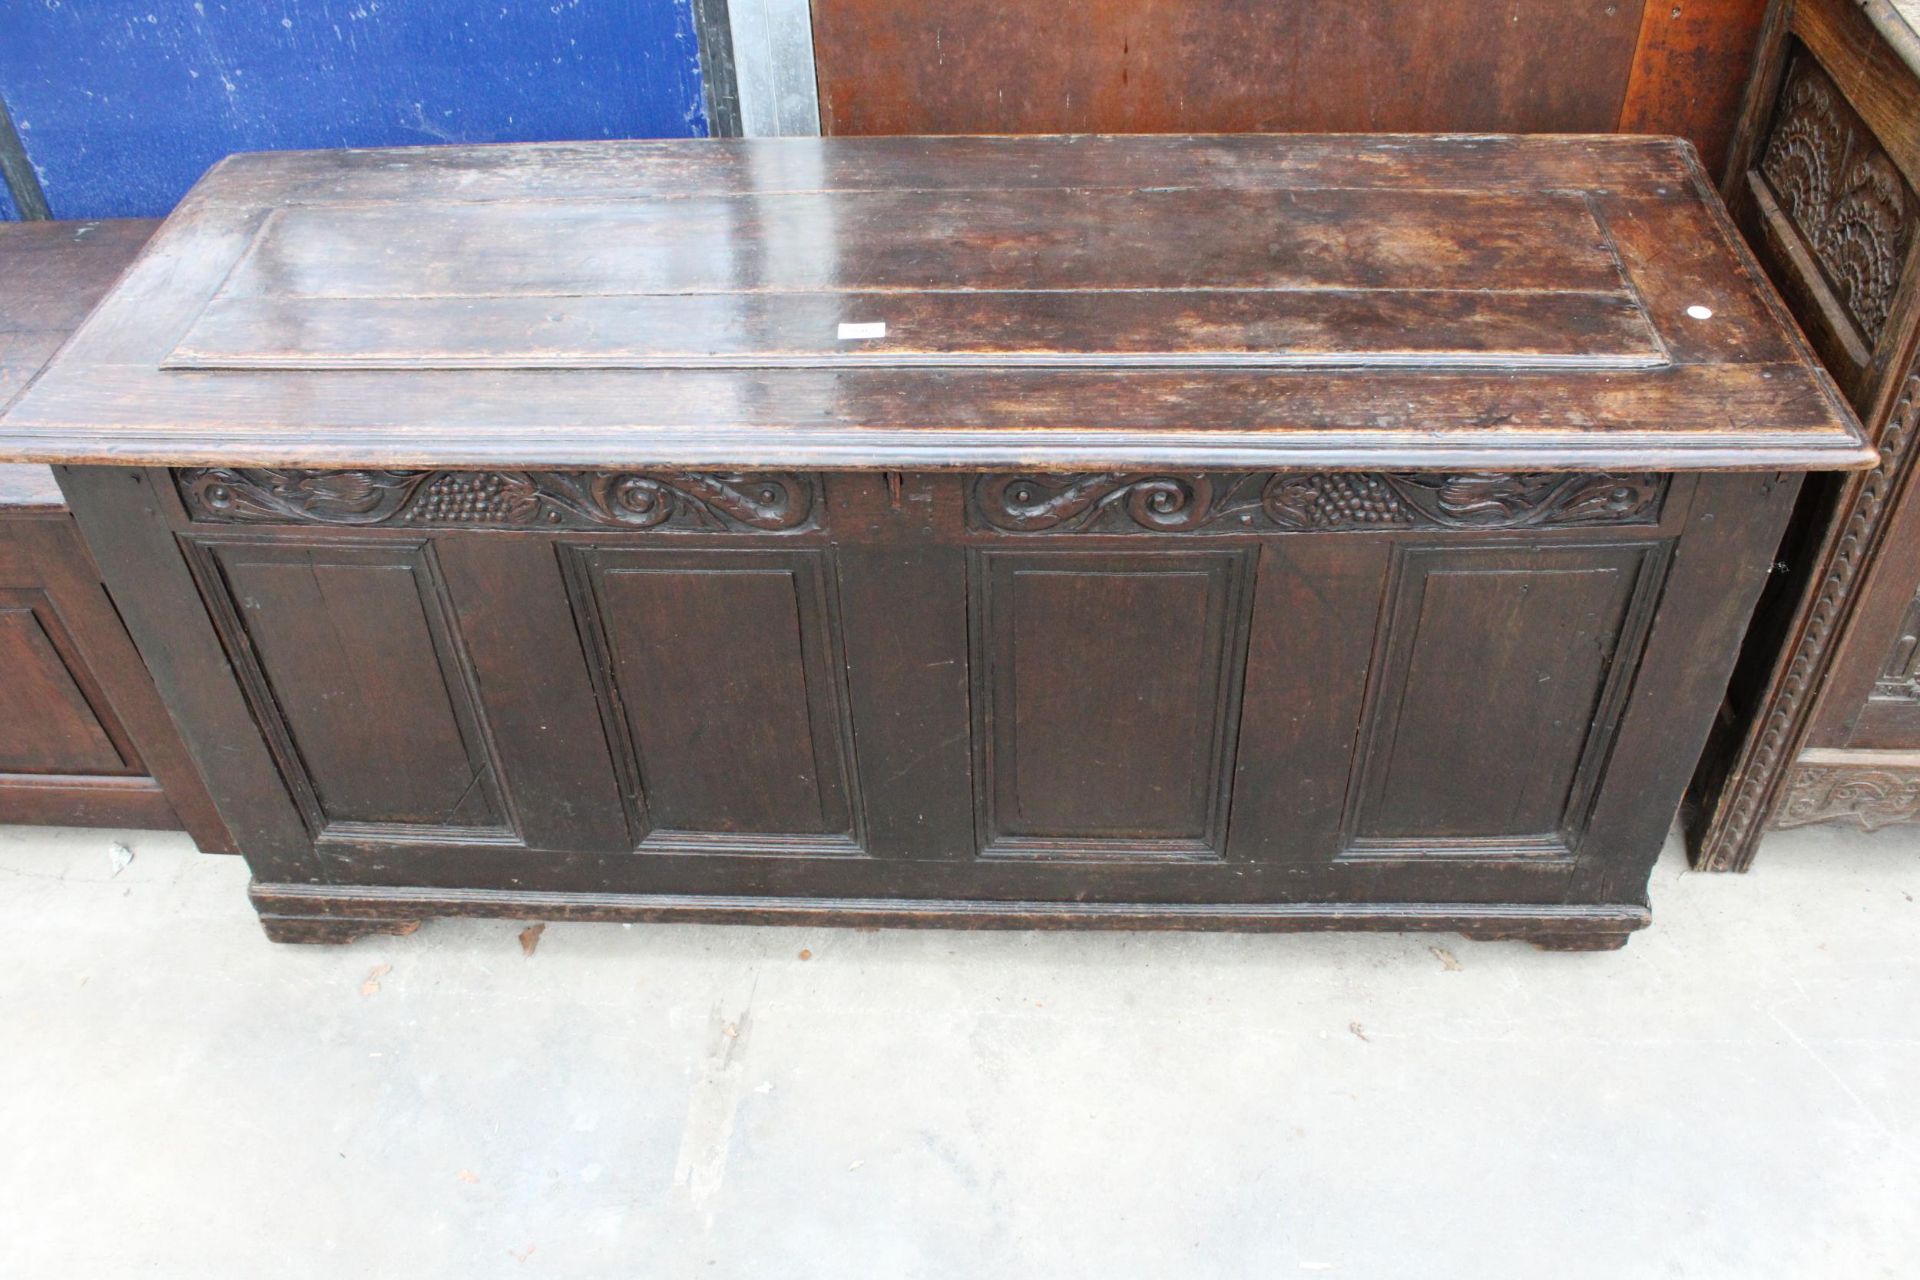 A GEORGIAN OAK BLANKET CHEST WITH FOUR PANEL FRONT ND FOLIAGE FRIEZE CARVING, 61" WIDE